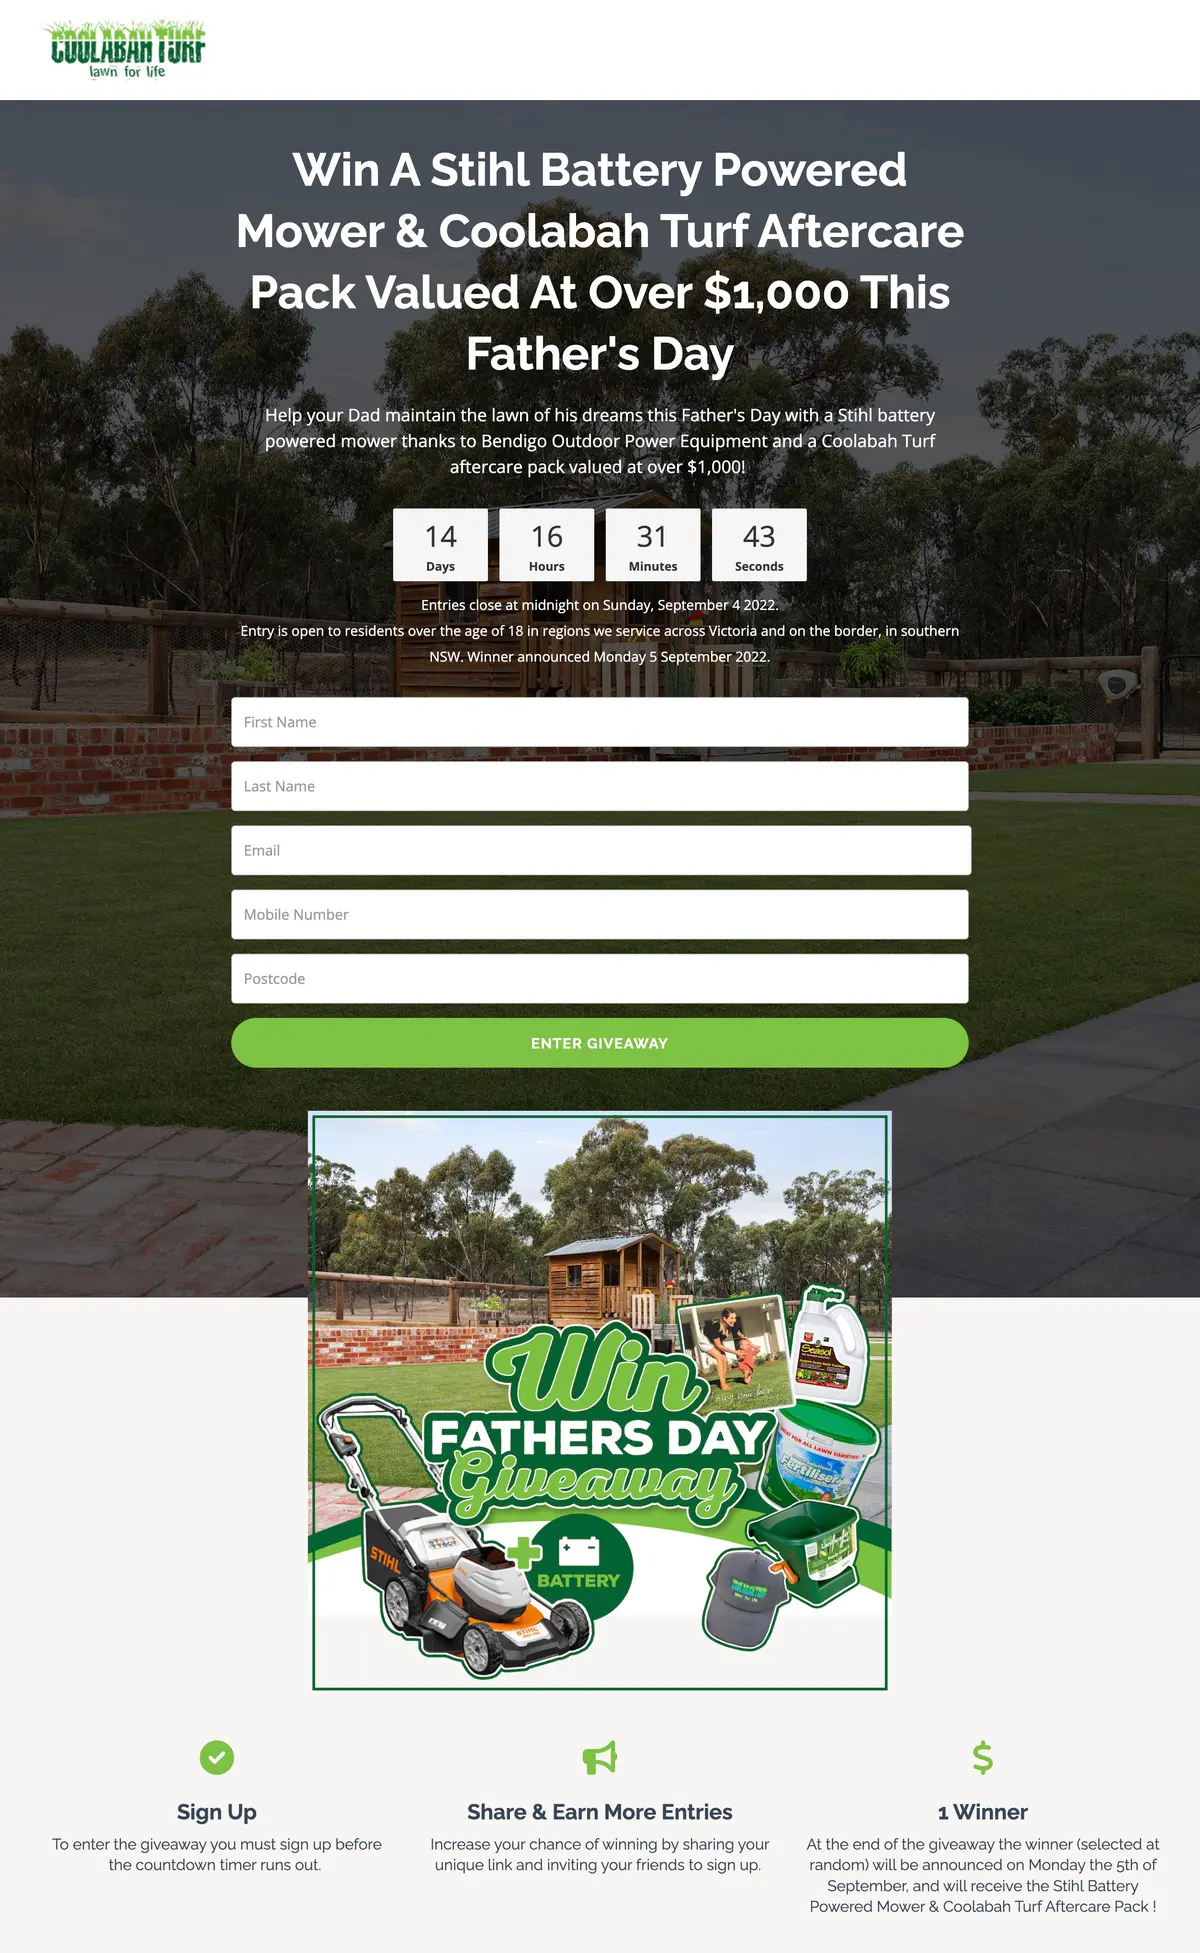 Father's Day giveaway, win a Stihl battery powered lawn mower and Coolabah turf aftercare pack